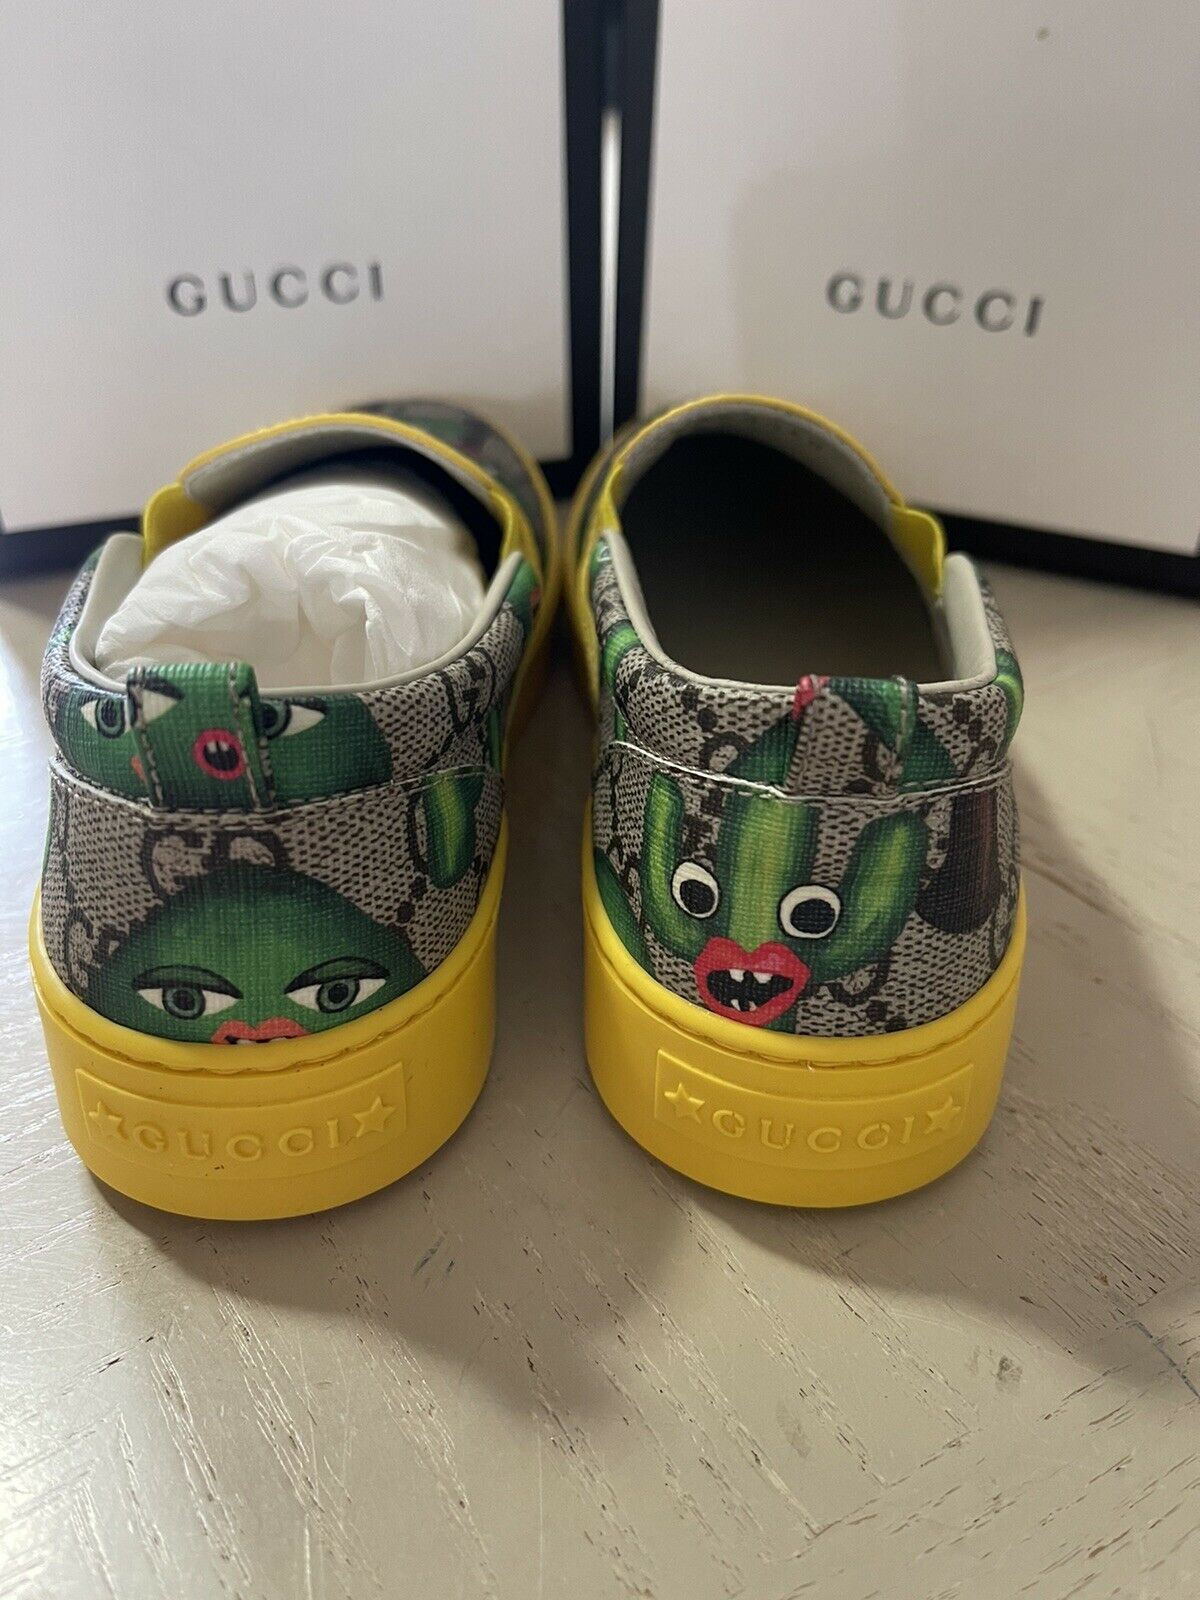 NIB Gucci Kids GG Monogram Leather/Canvas Sneakers Green/Cray 32/1 US Age 6.5